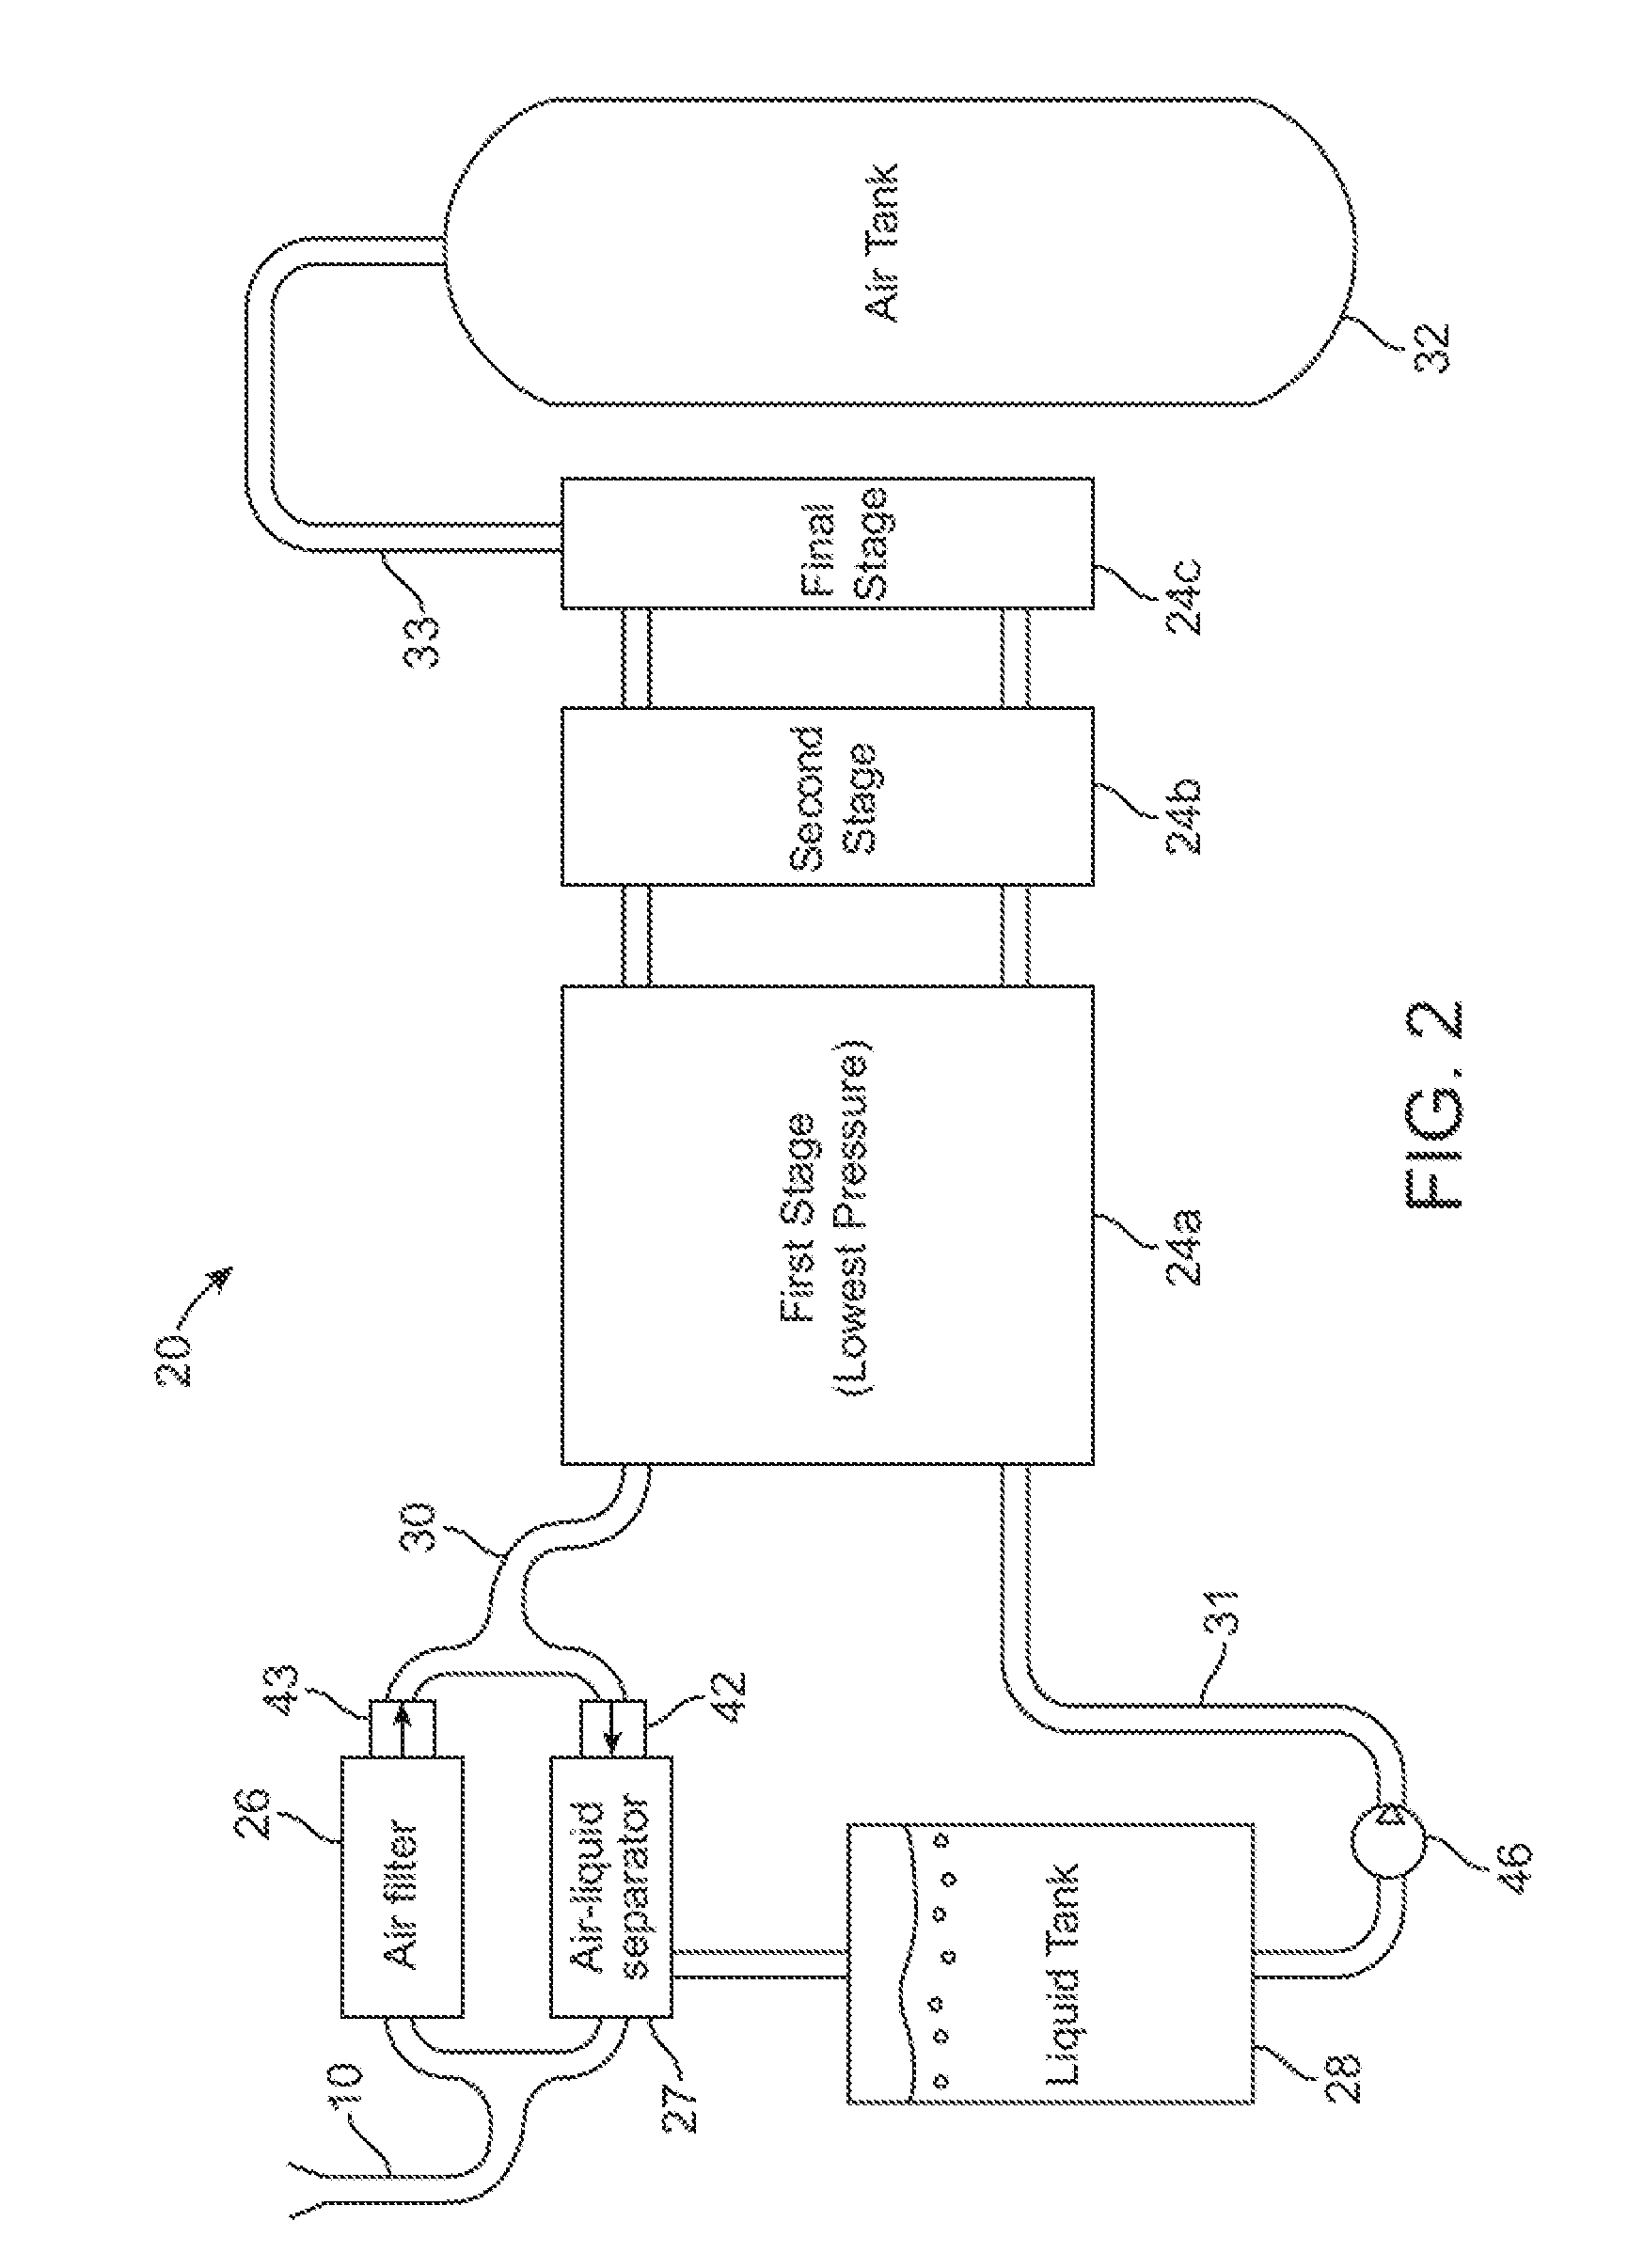 Compressed air energy storage system utilizing two-phase flow to facilitate heat exchange